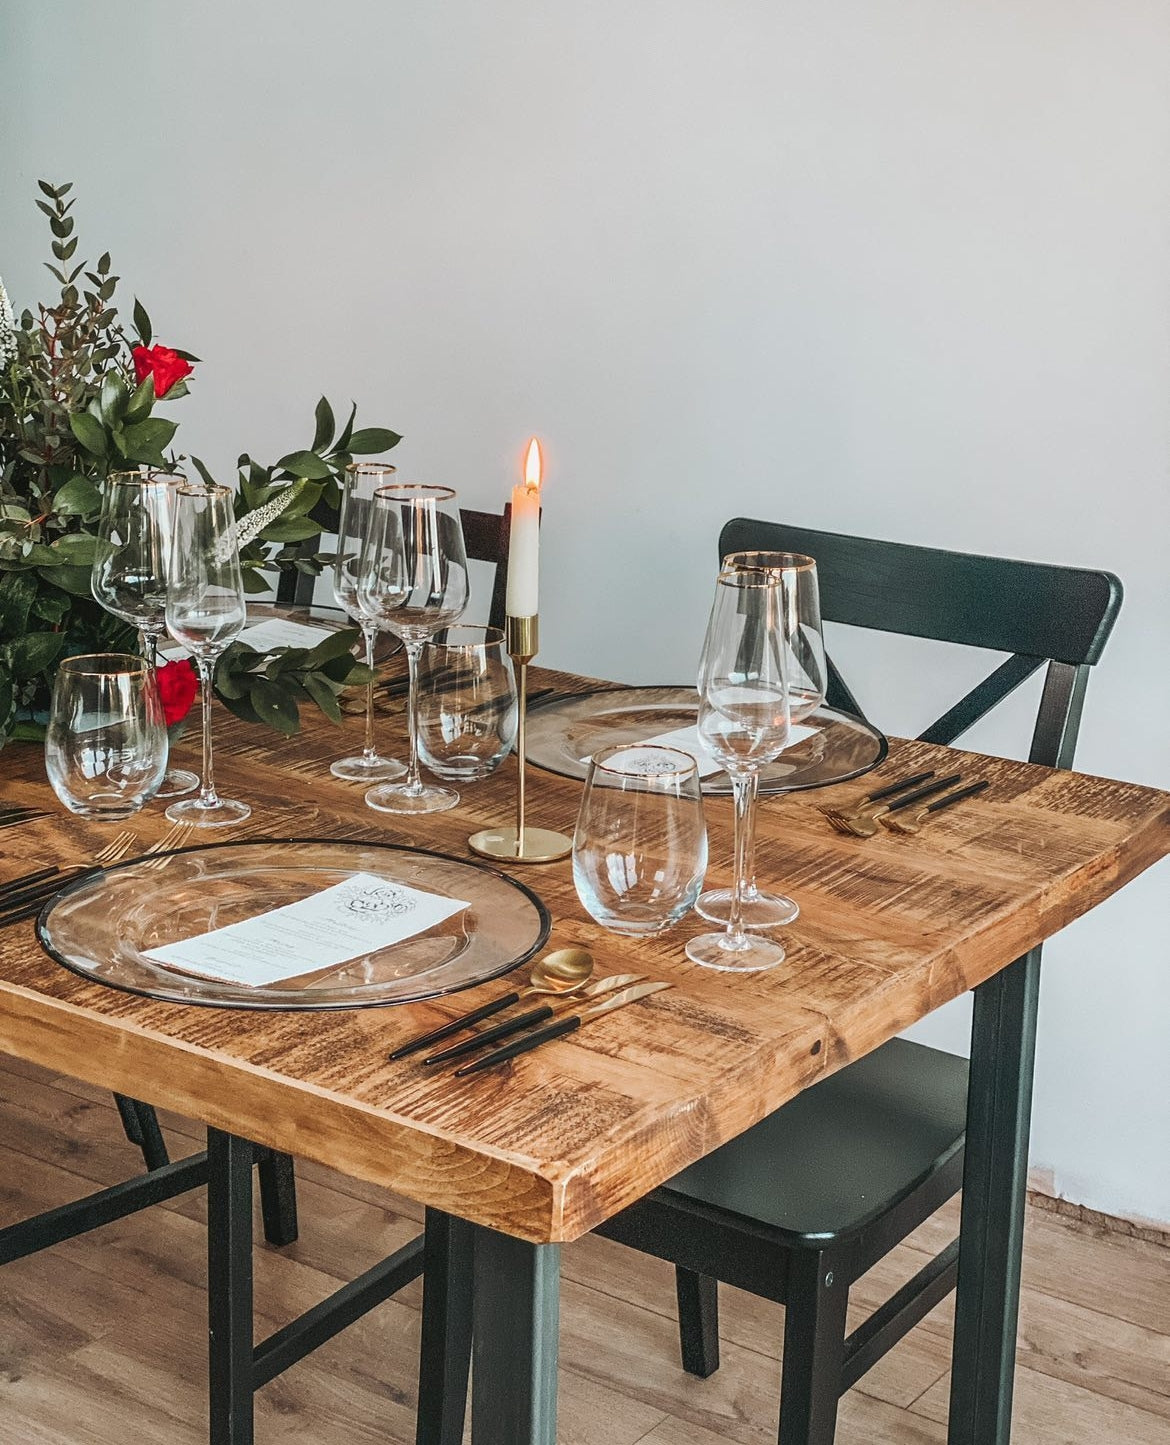 How to choose the perfect dining table for Christmas Dinner